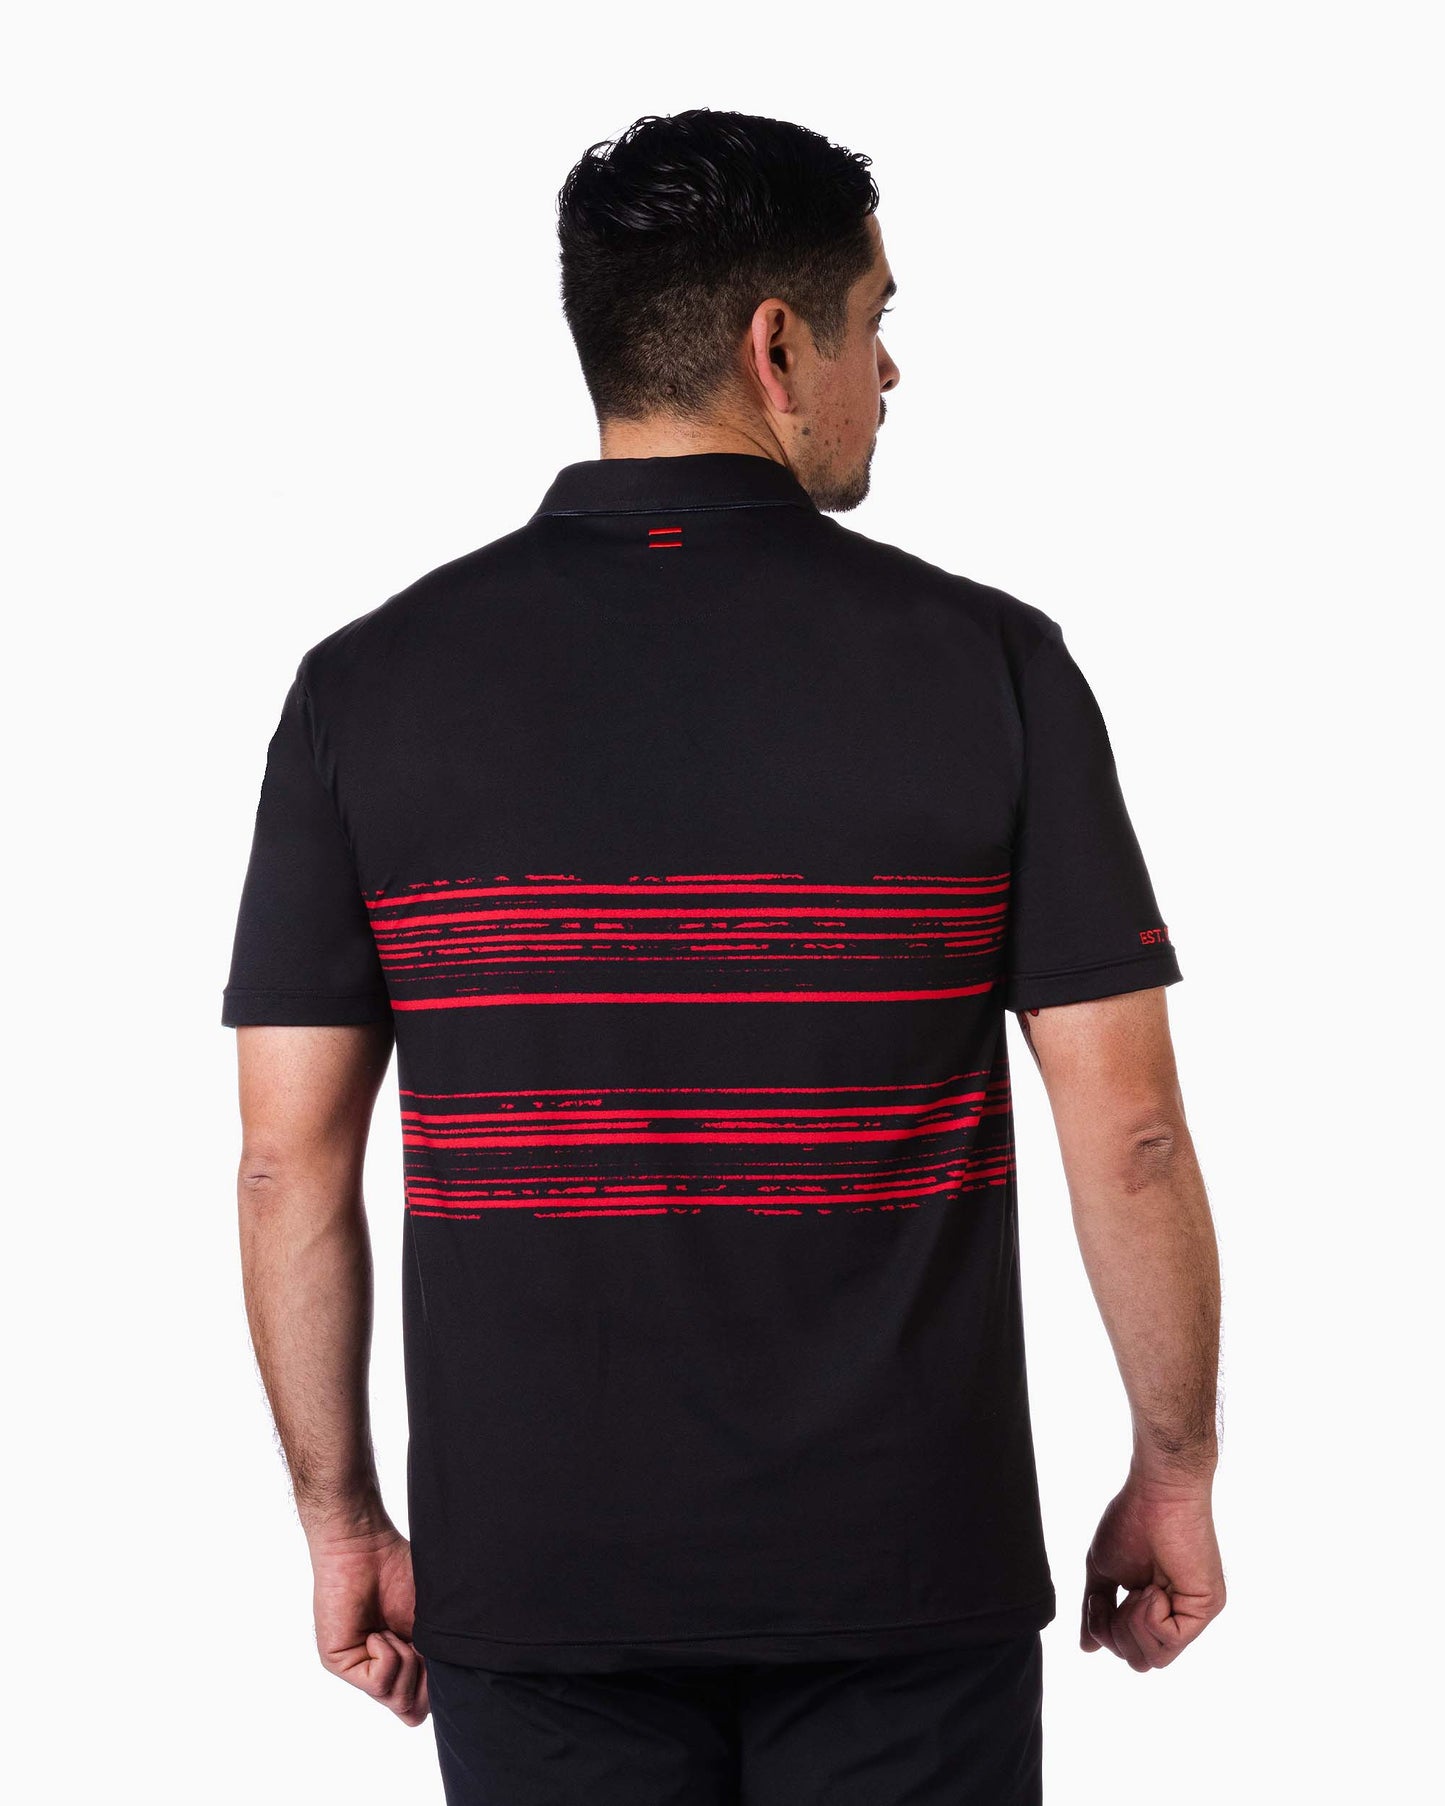 back of man wearing polo with two red woven stripes on top